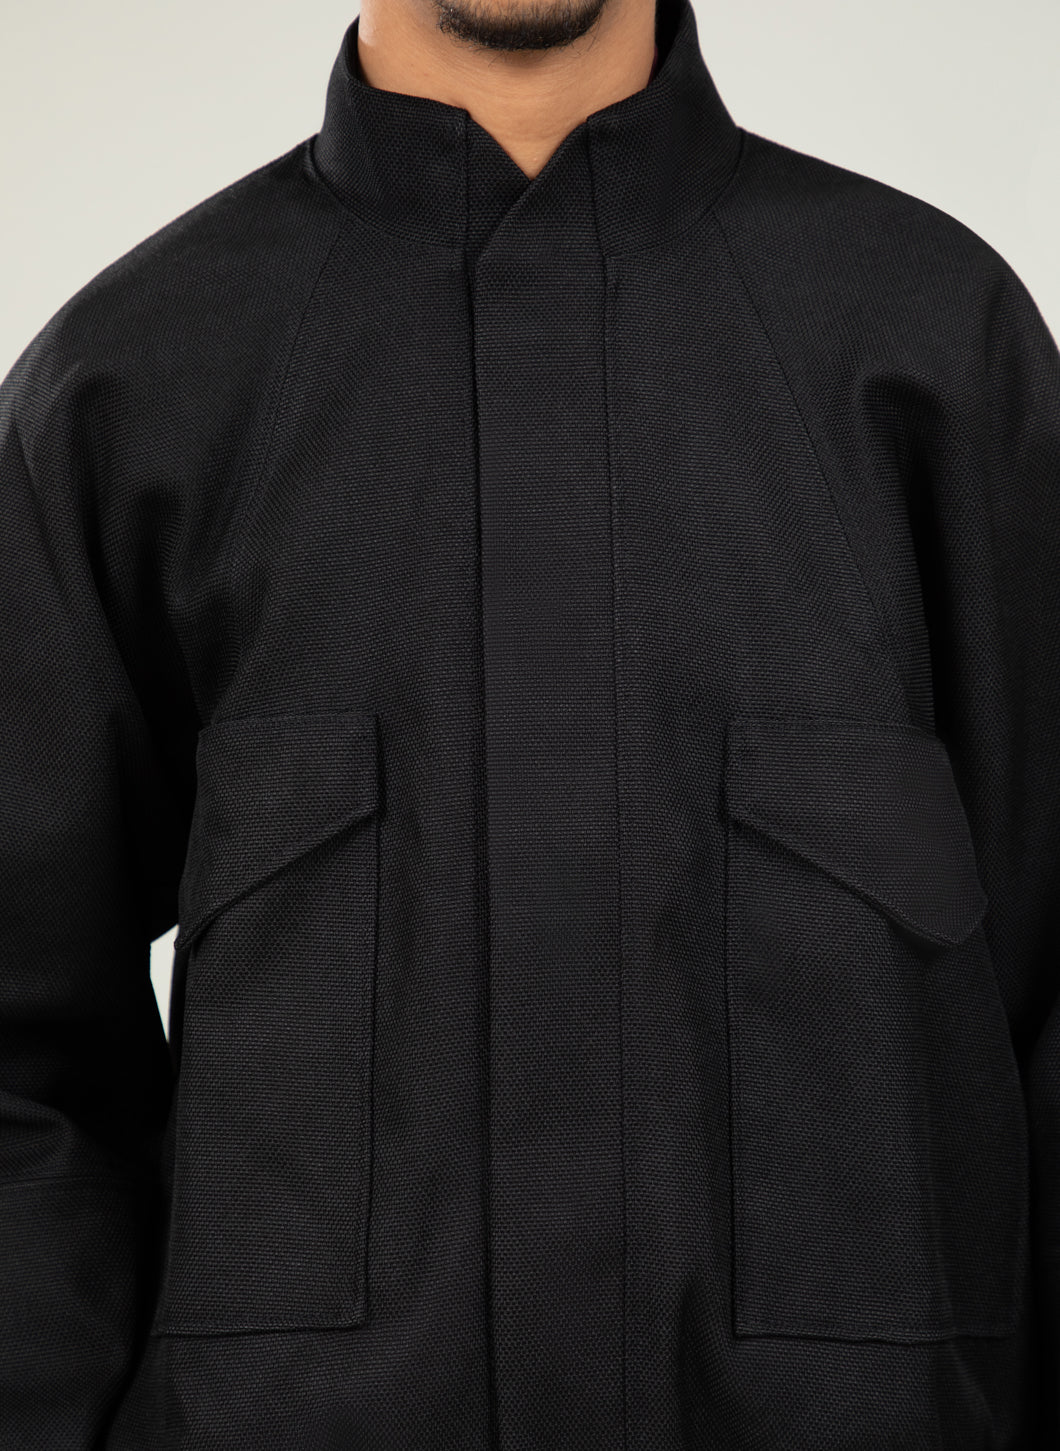 Bomber Jacket with Origami Collar in Black Technical Gros Grain